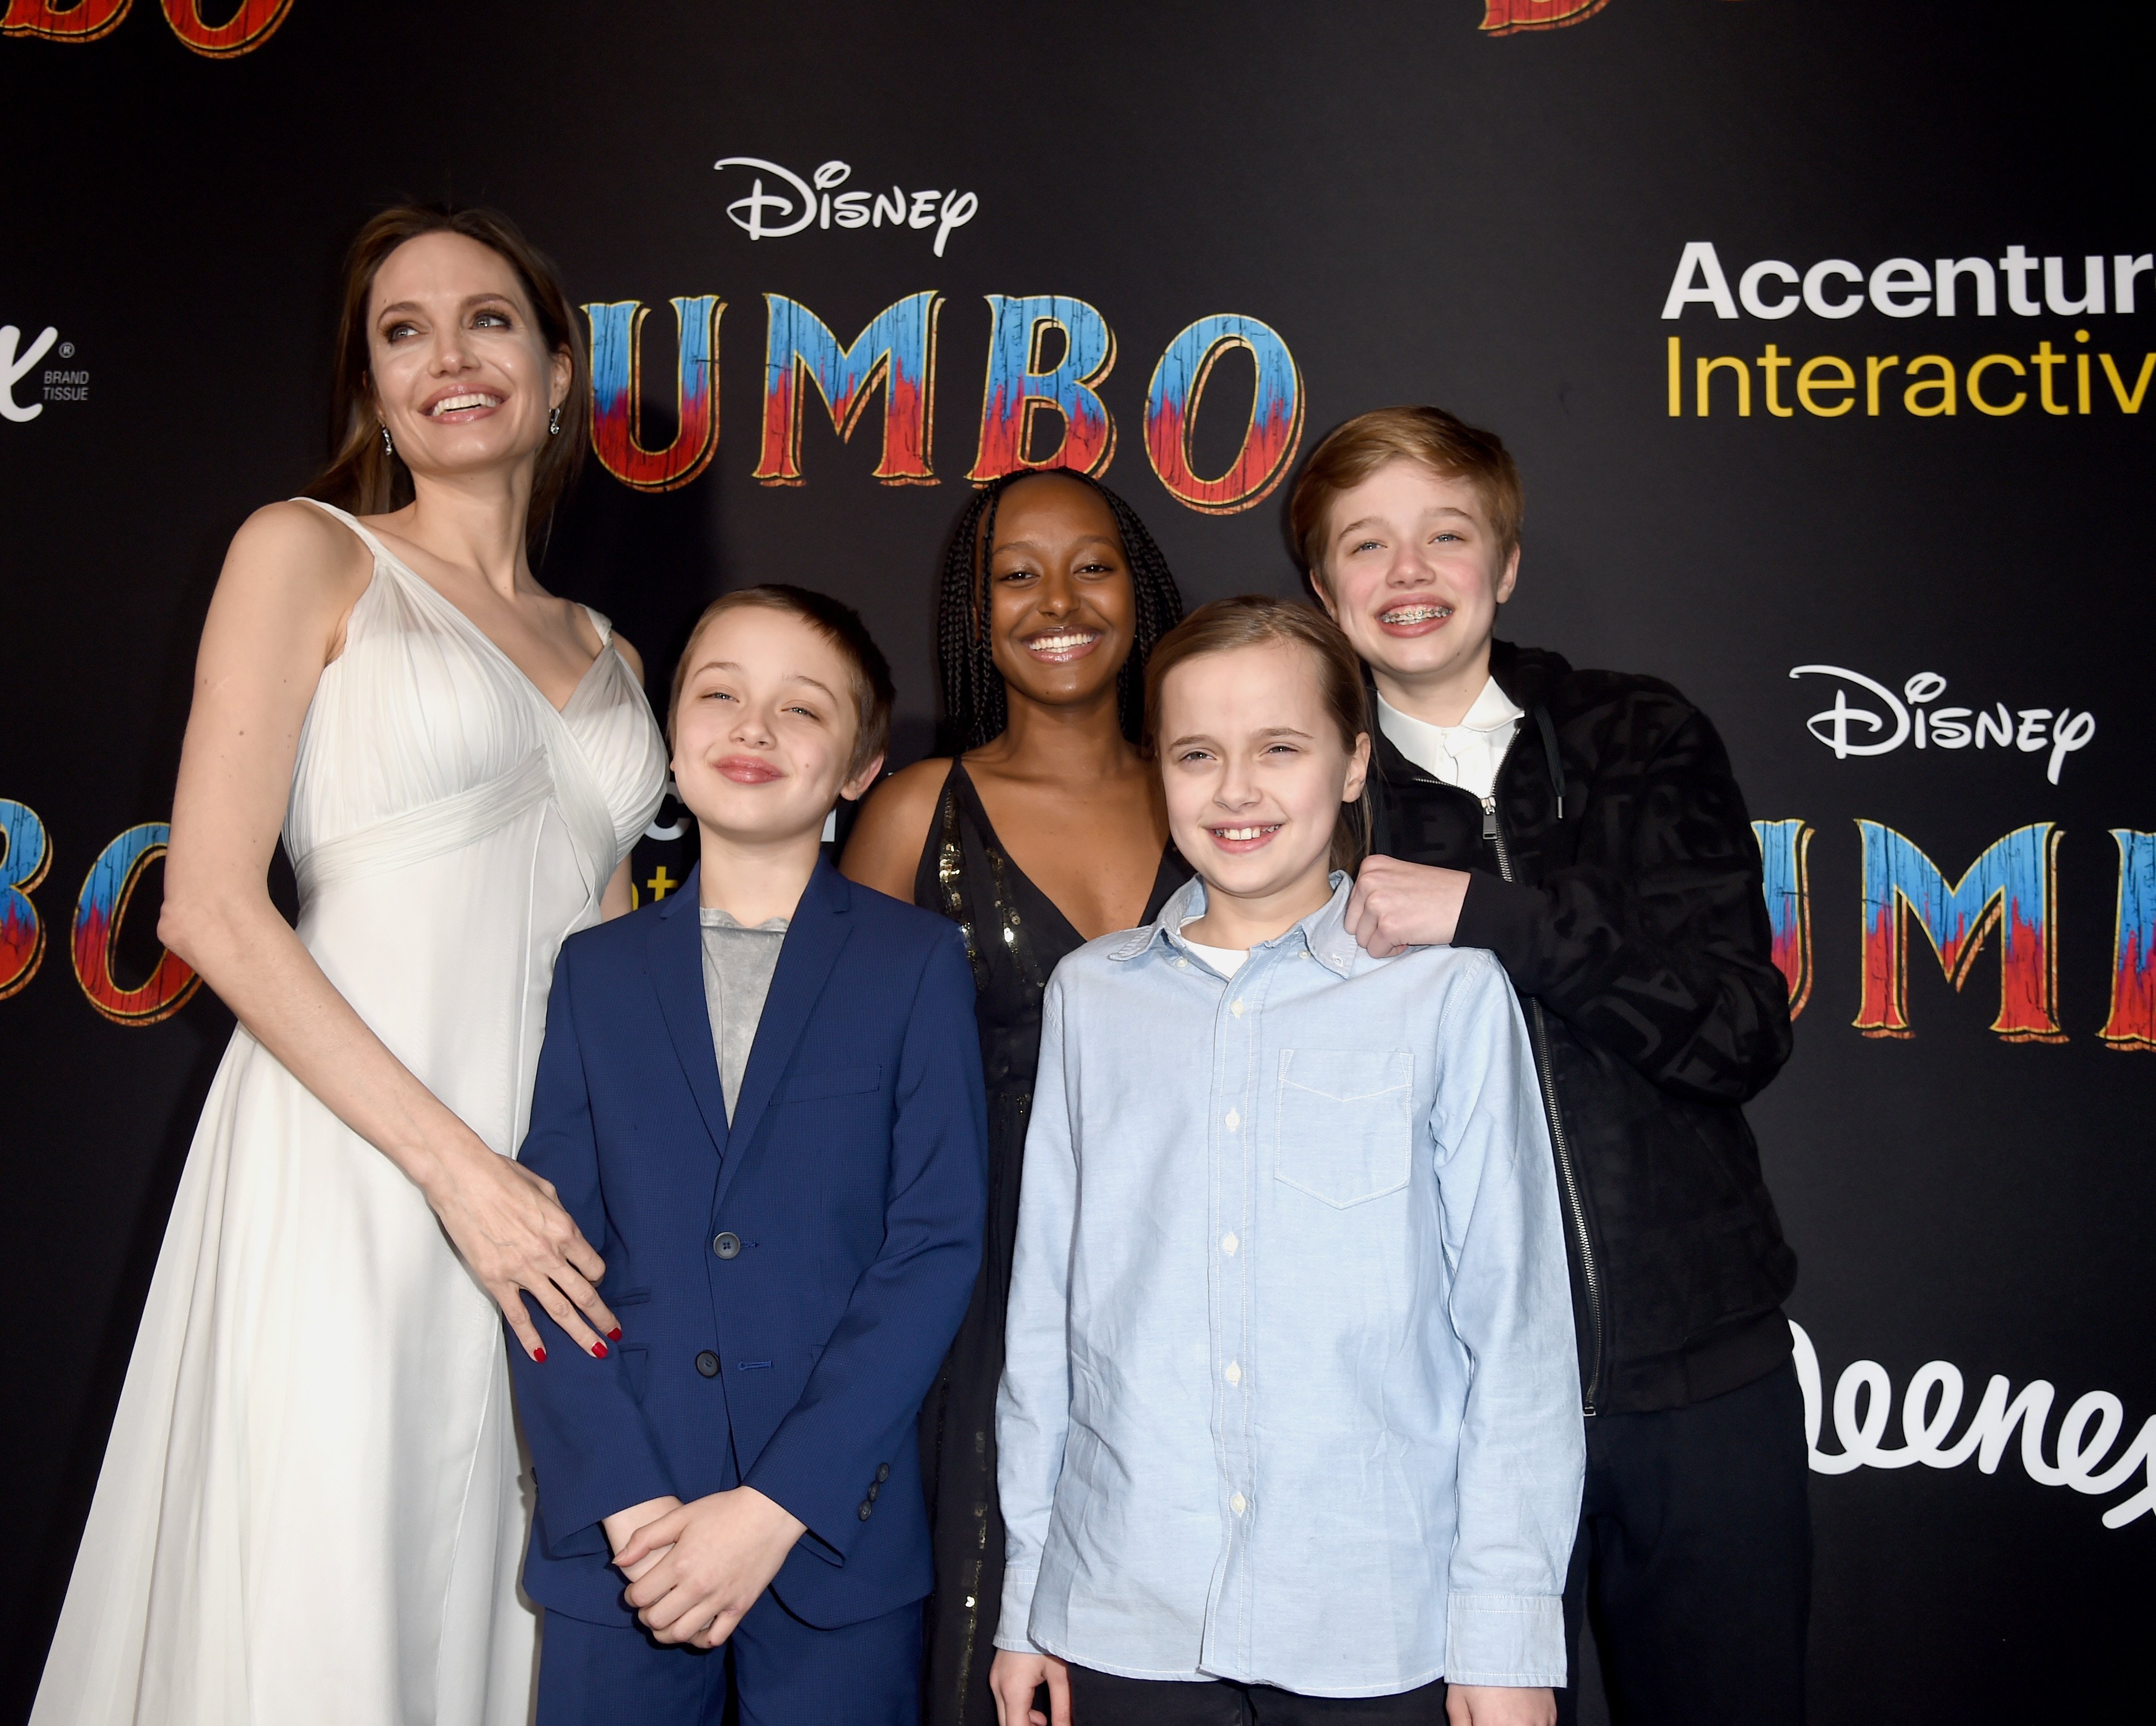 Angelina Jolie and her children attend the premiere of "Dumbo" in Los Angeles, California on March 11, 2019 | Photo: Getty Images